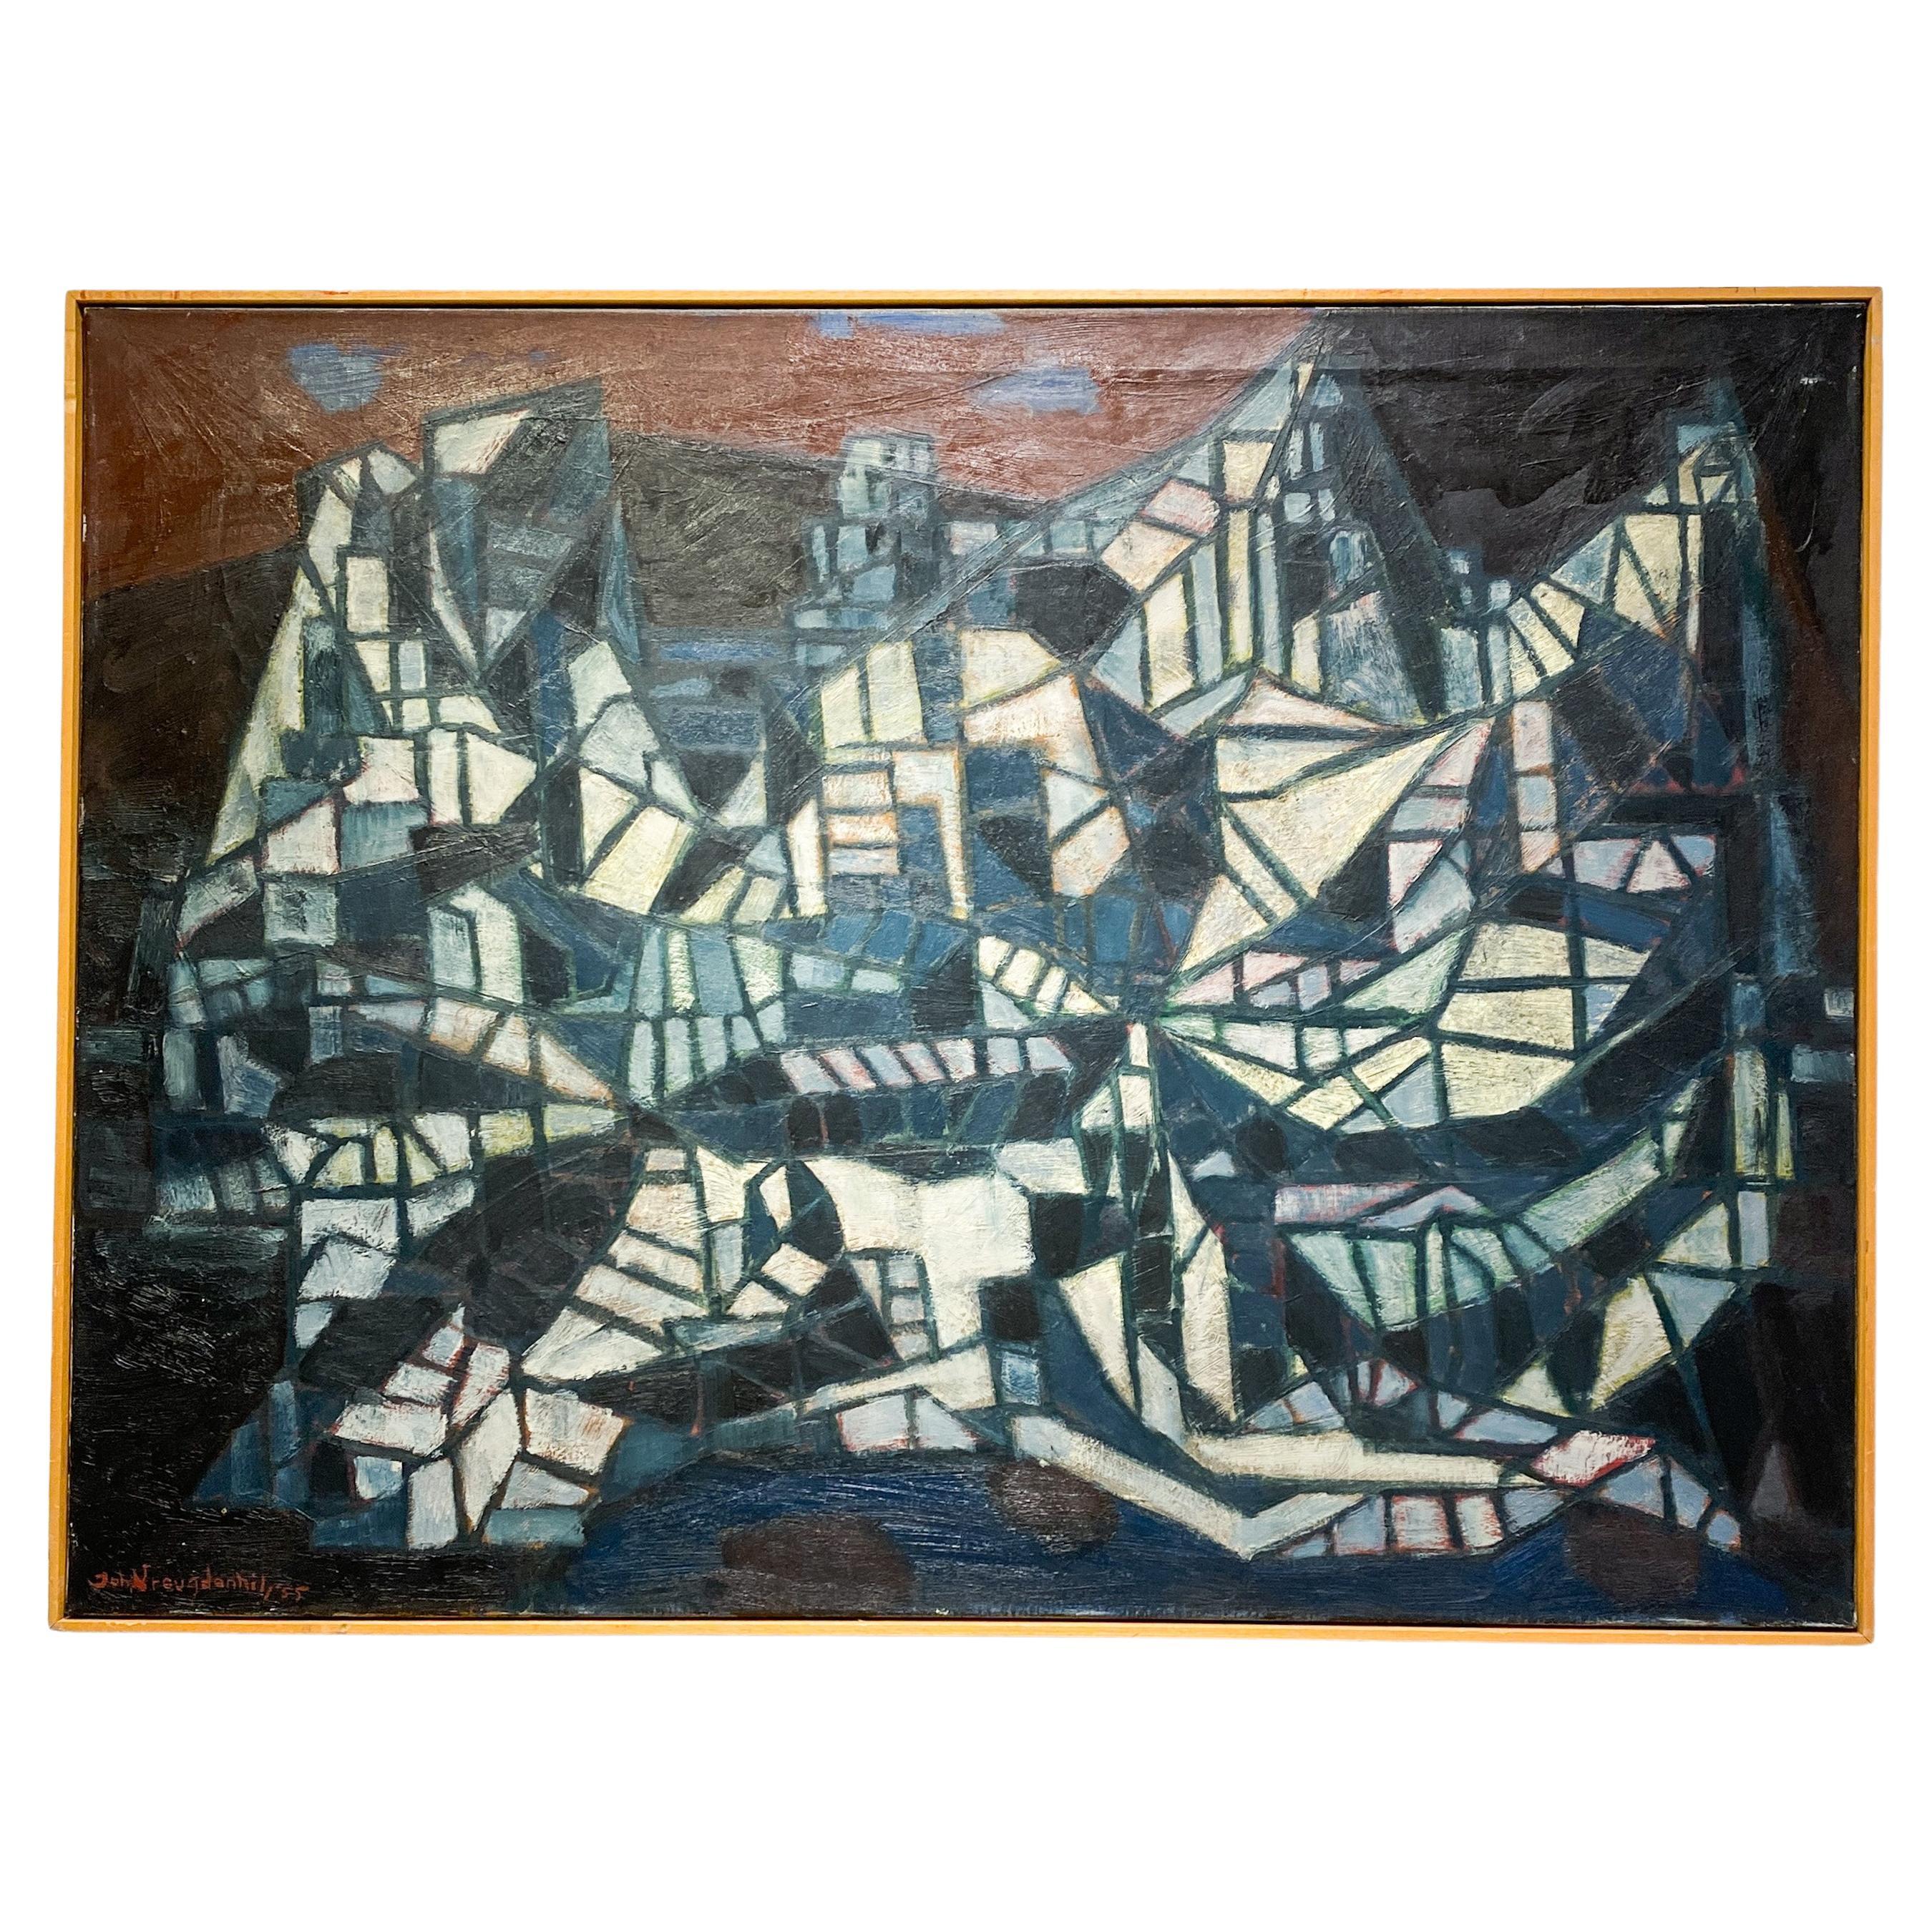 Midcentury Abstract Vreugdenhil Oil on Canvas, Dutch 1950s, Signed & Dated For Sale